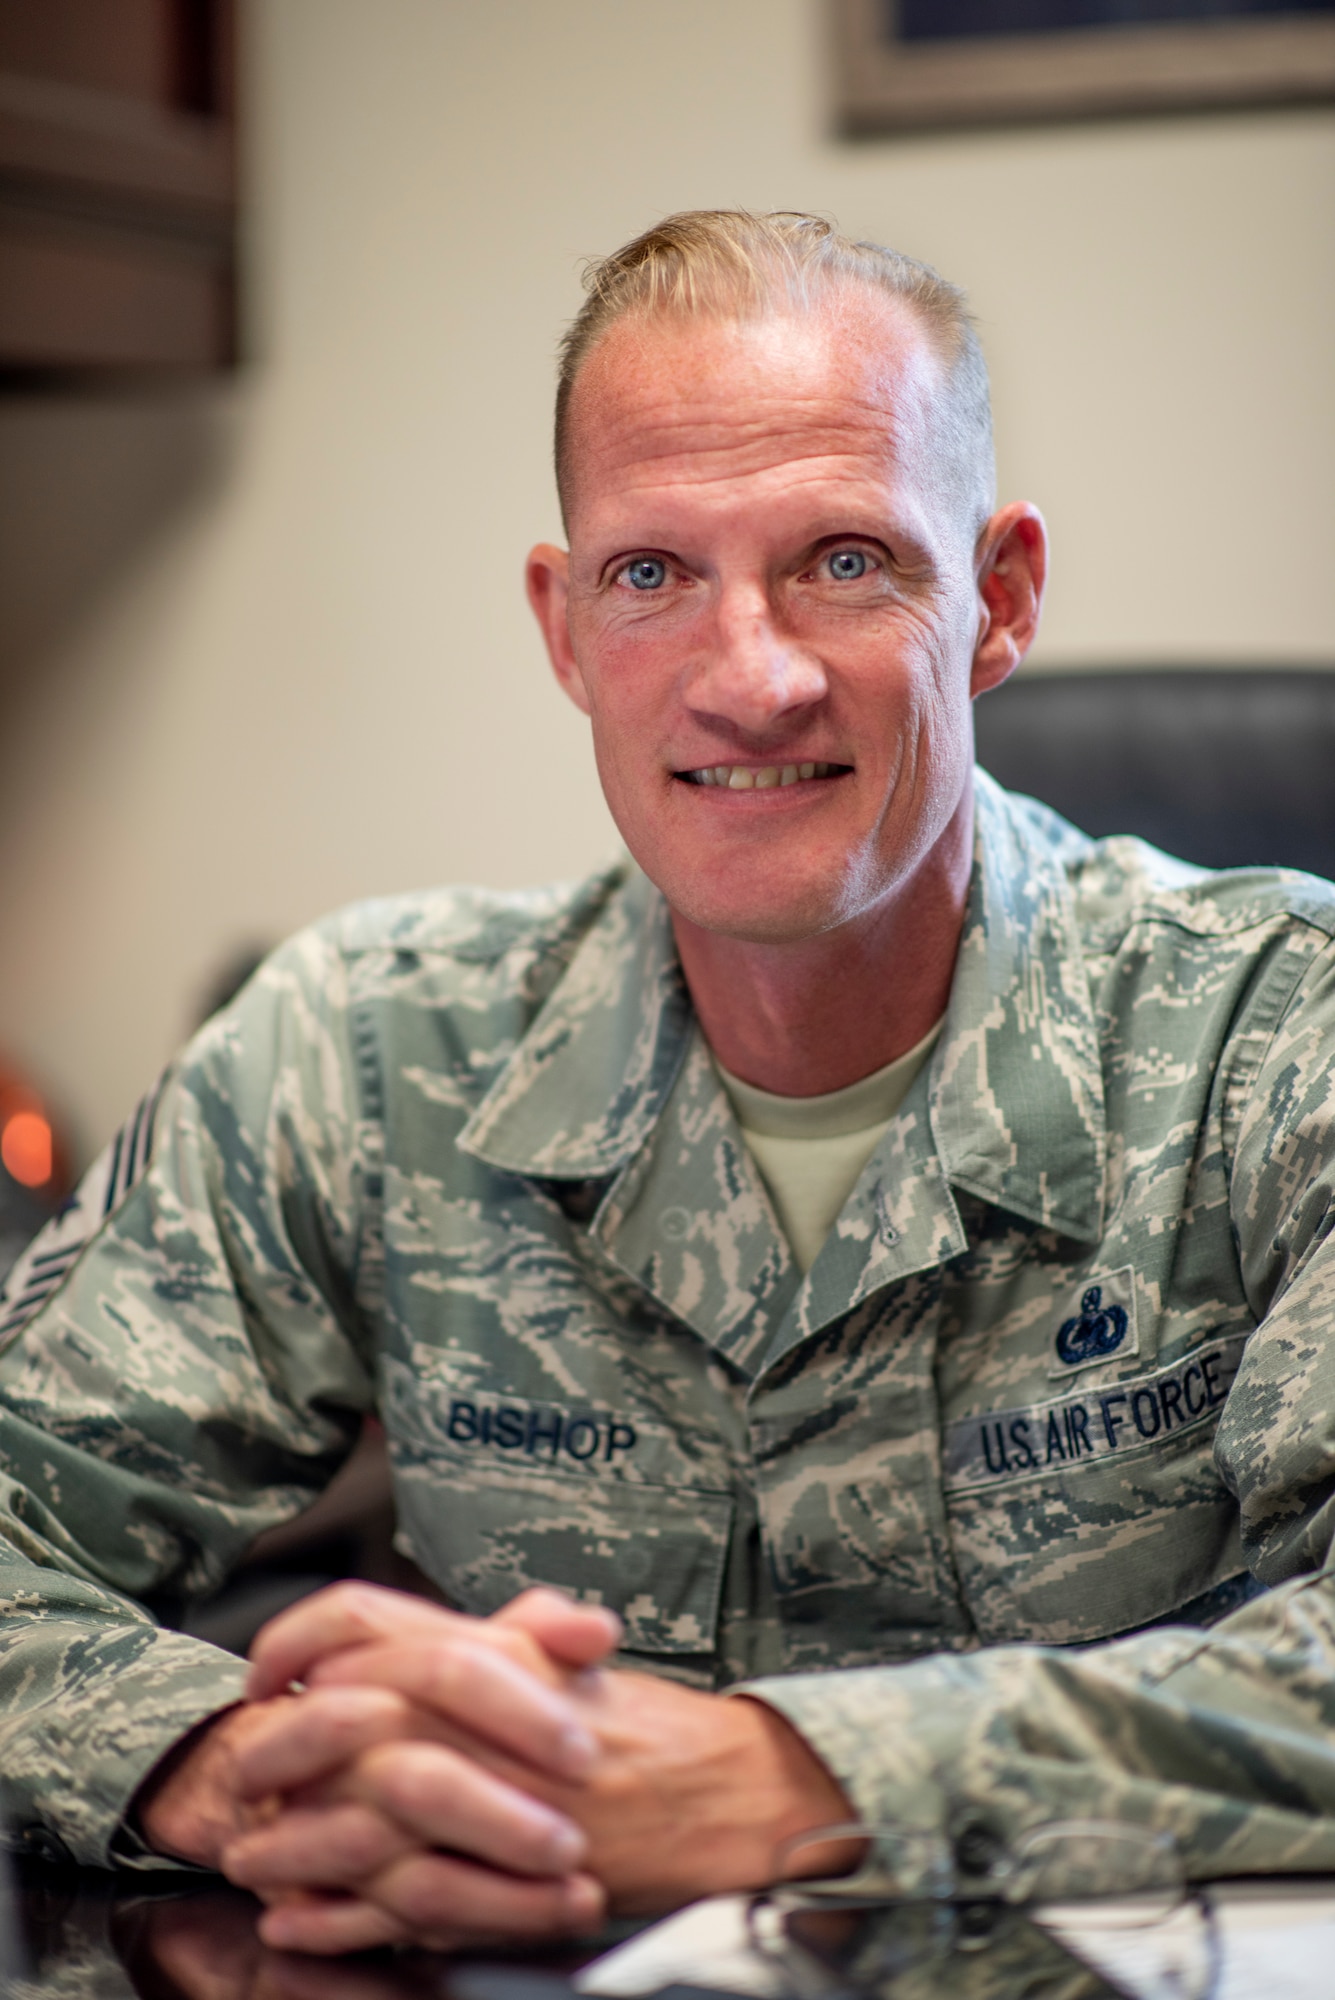 (U.S. Air Force courtesy photo of Chief Master Sgt. David Bishop, 141st Air Refueling Wing command chief)